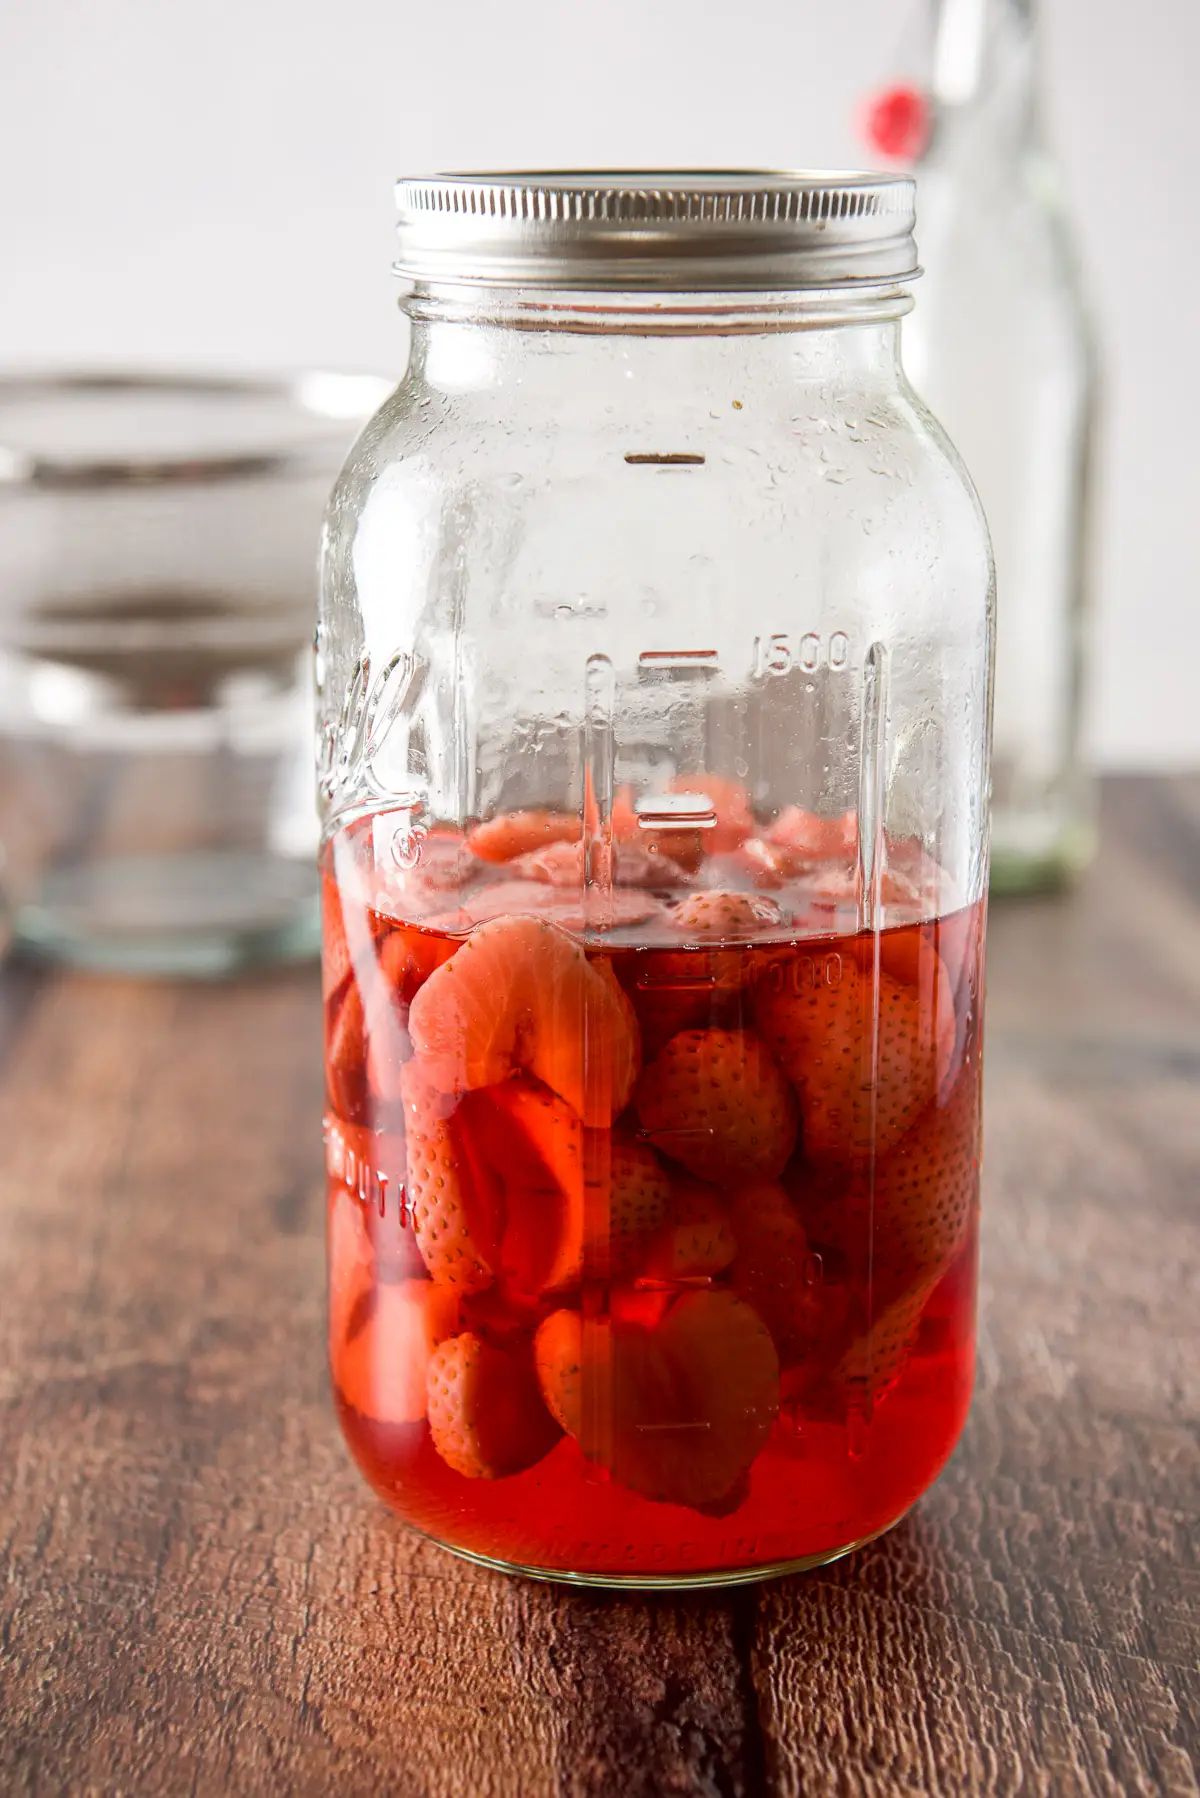 The lidded jar with the strawberries and red vodka ready to be strained